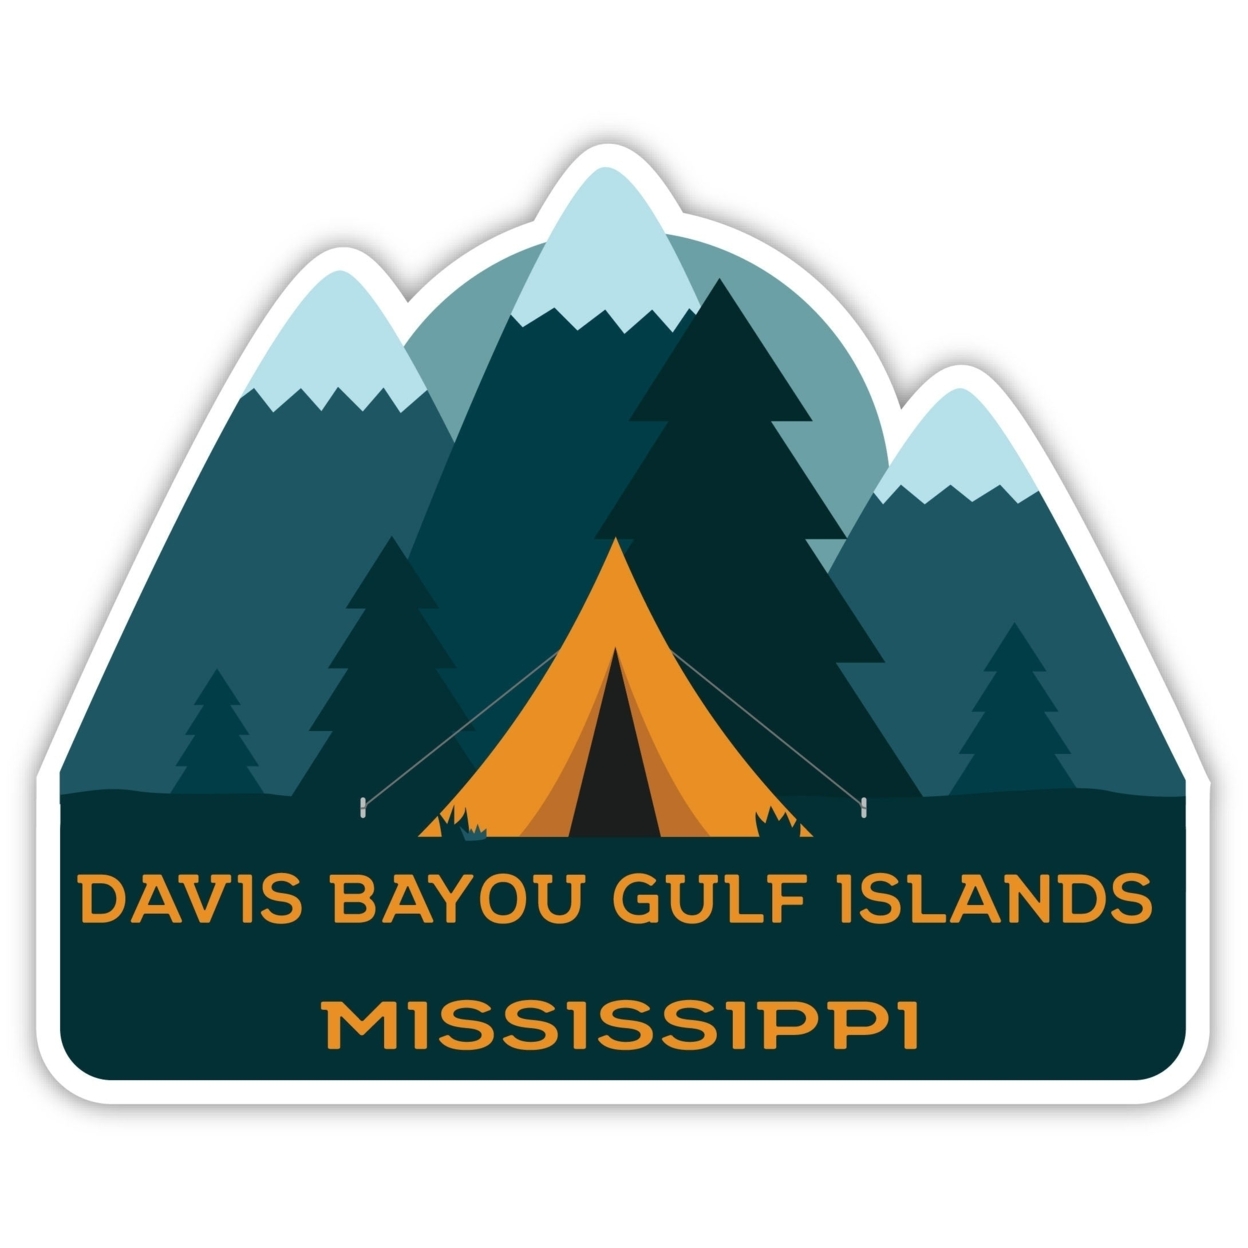 Davis Bayou Gulf Islands Mississippi Souvenir Decorative Stickers (Choose Theme And Size) - 4-Pack, 4-Inch, Tent